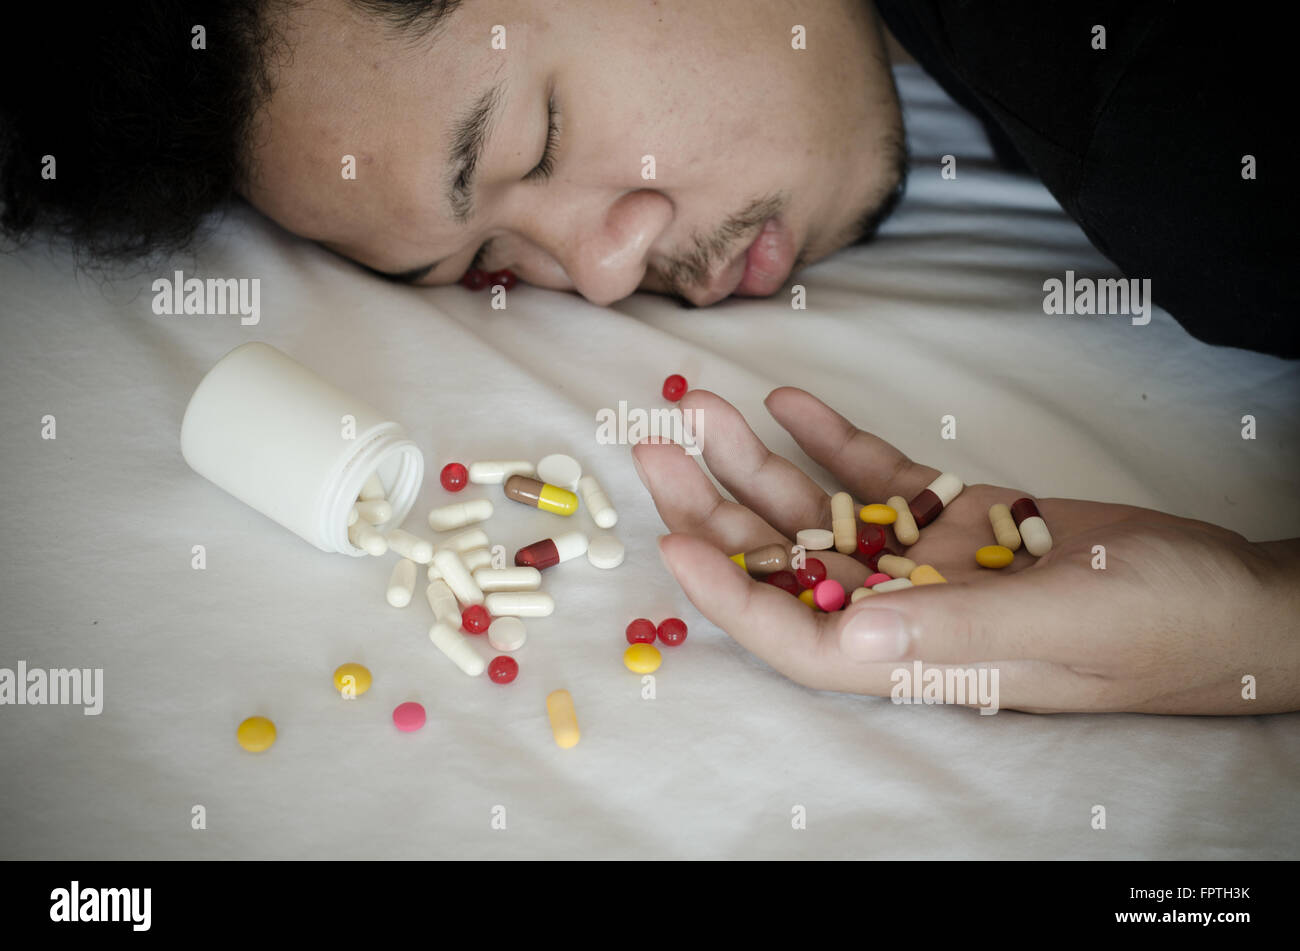 drug addict laying on the bed Stock Photo